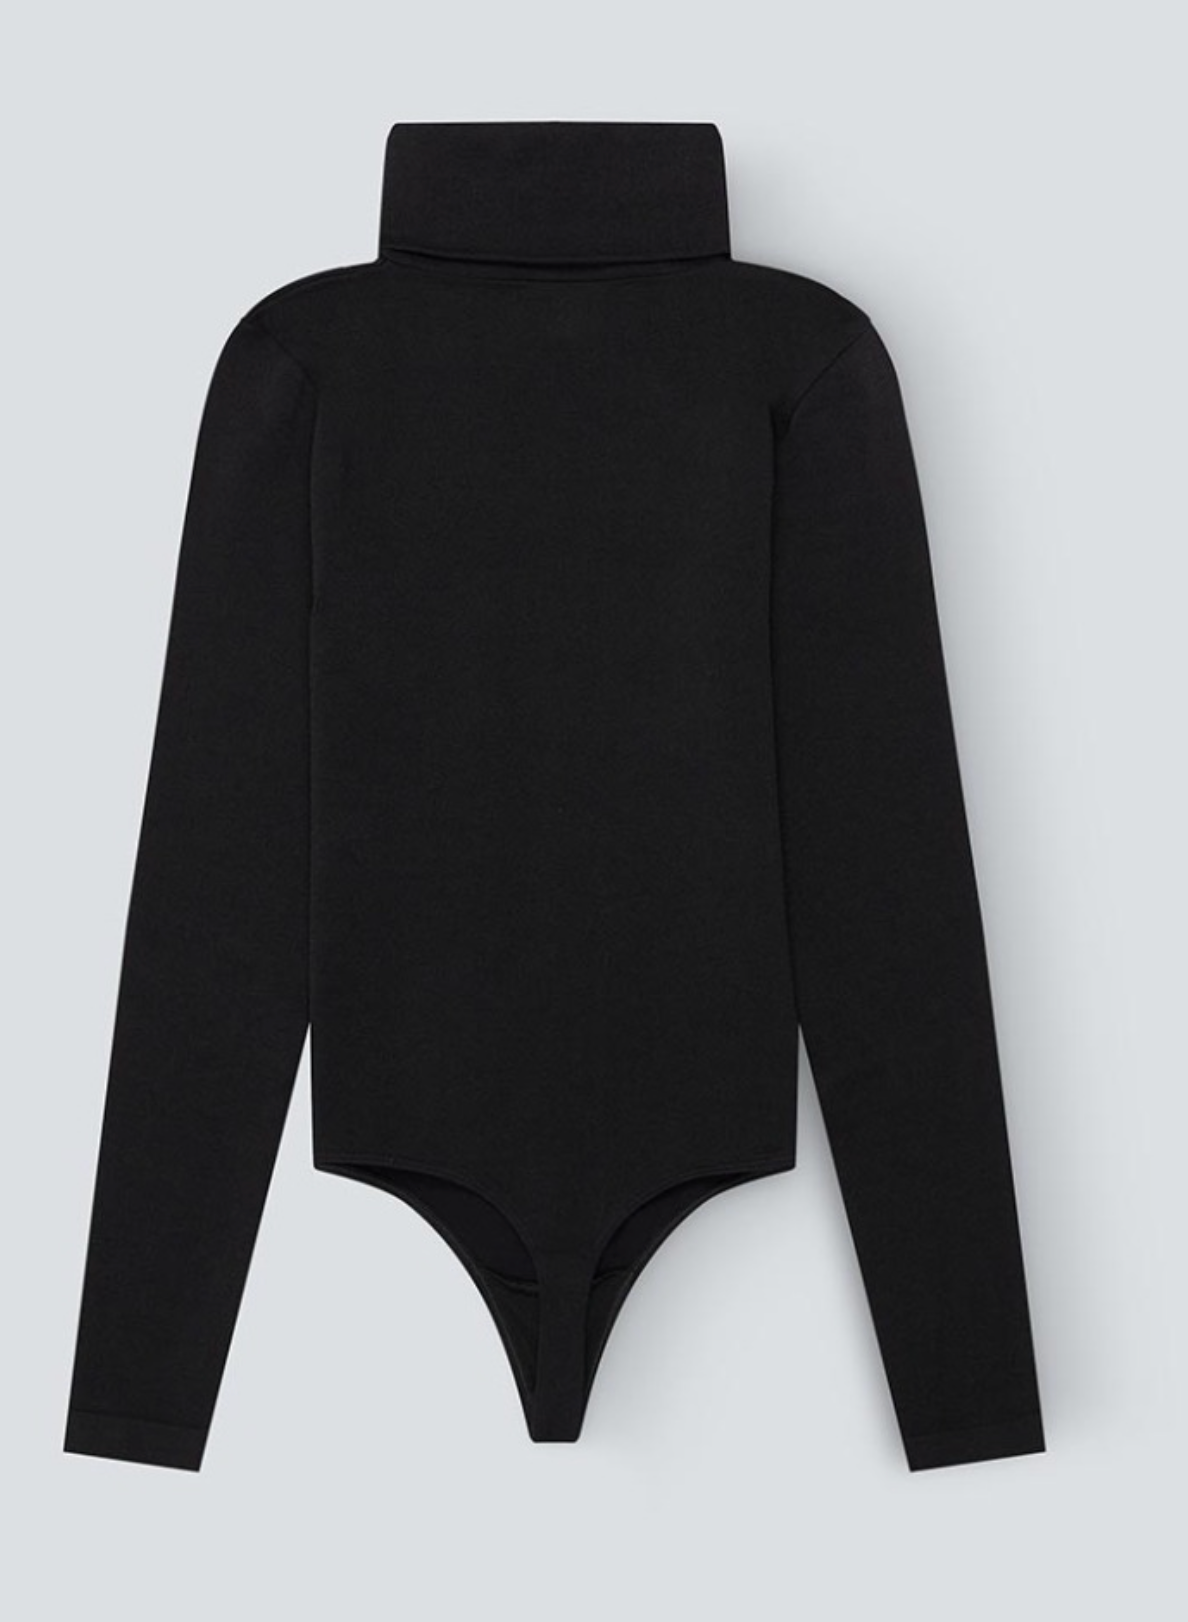 Perfect Moment Base Body Suit in Black